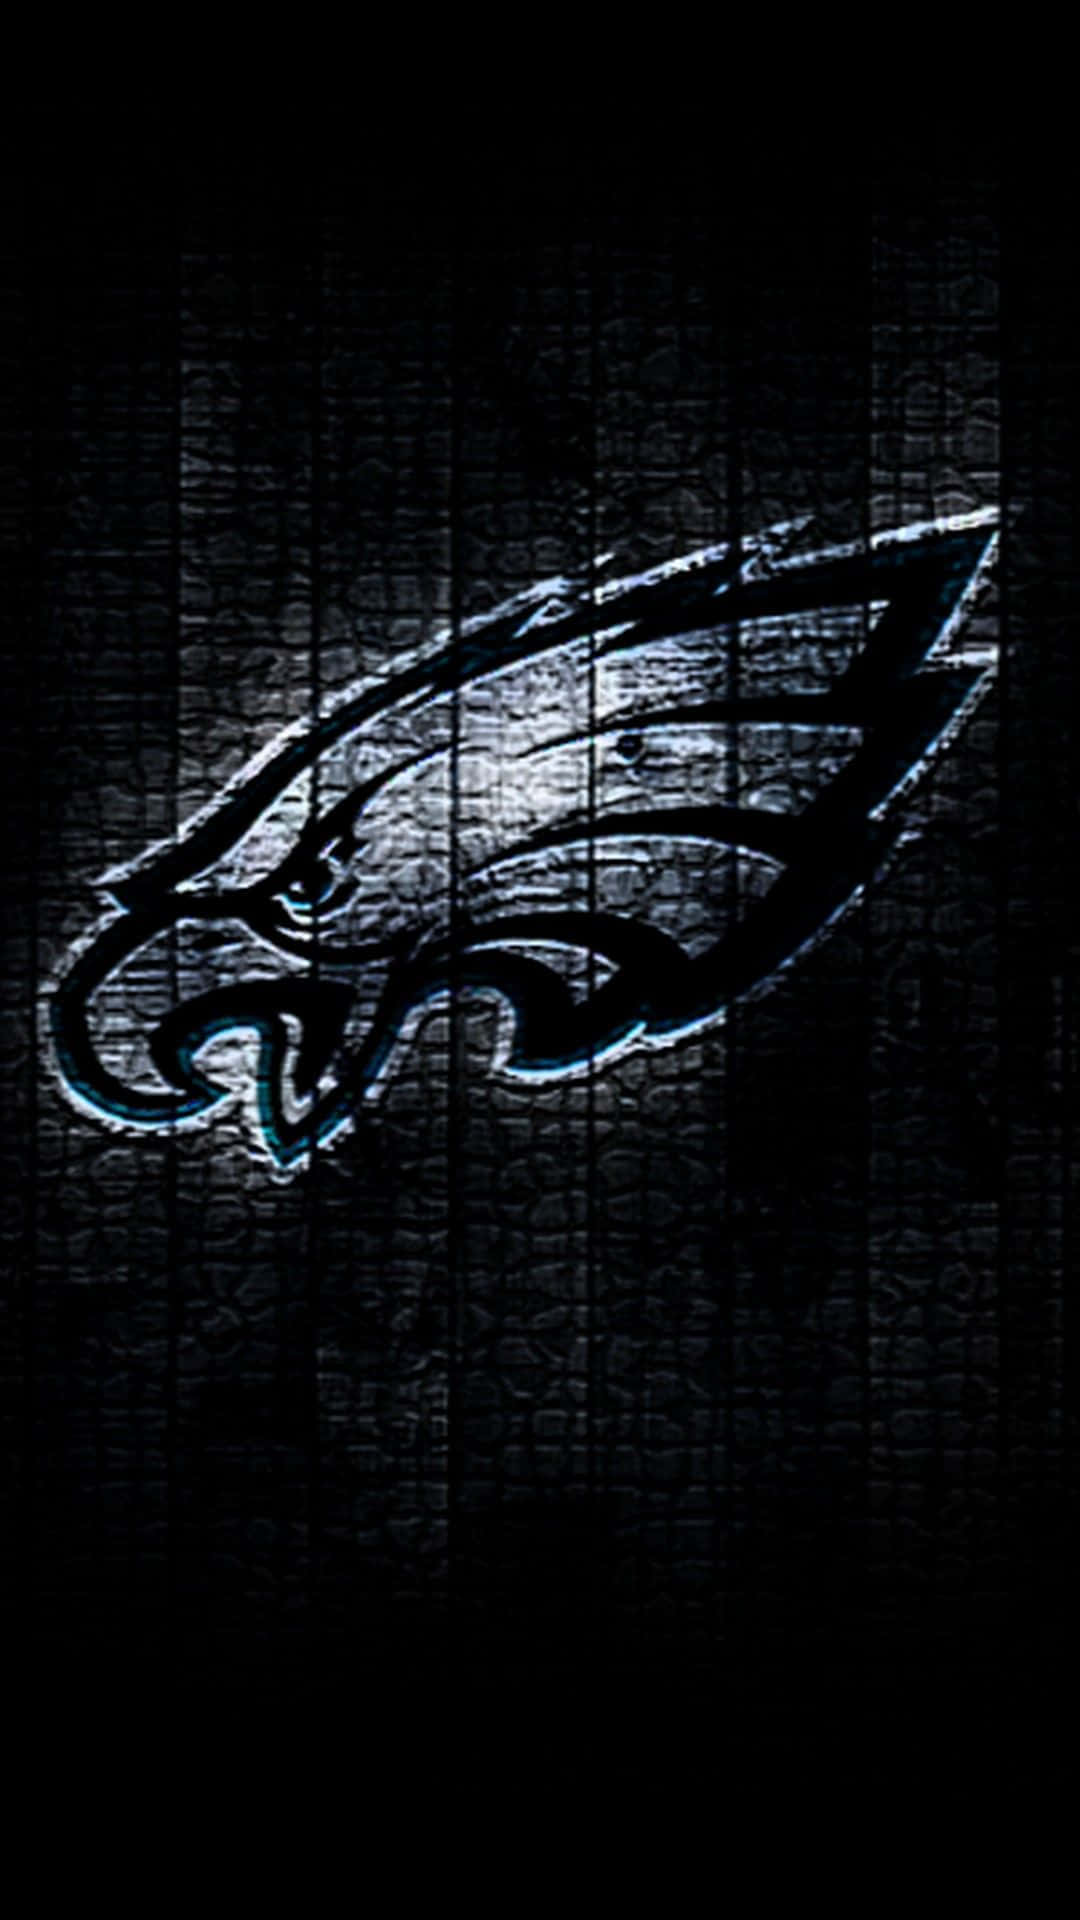 Download Get ready for football season with the new Philadelphia Eagles  iPhone Wallpaper